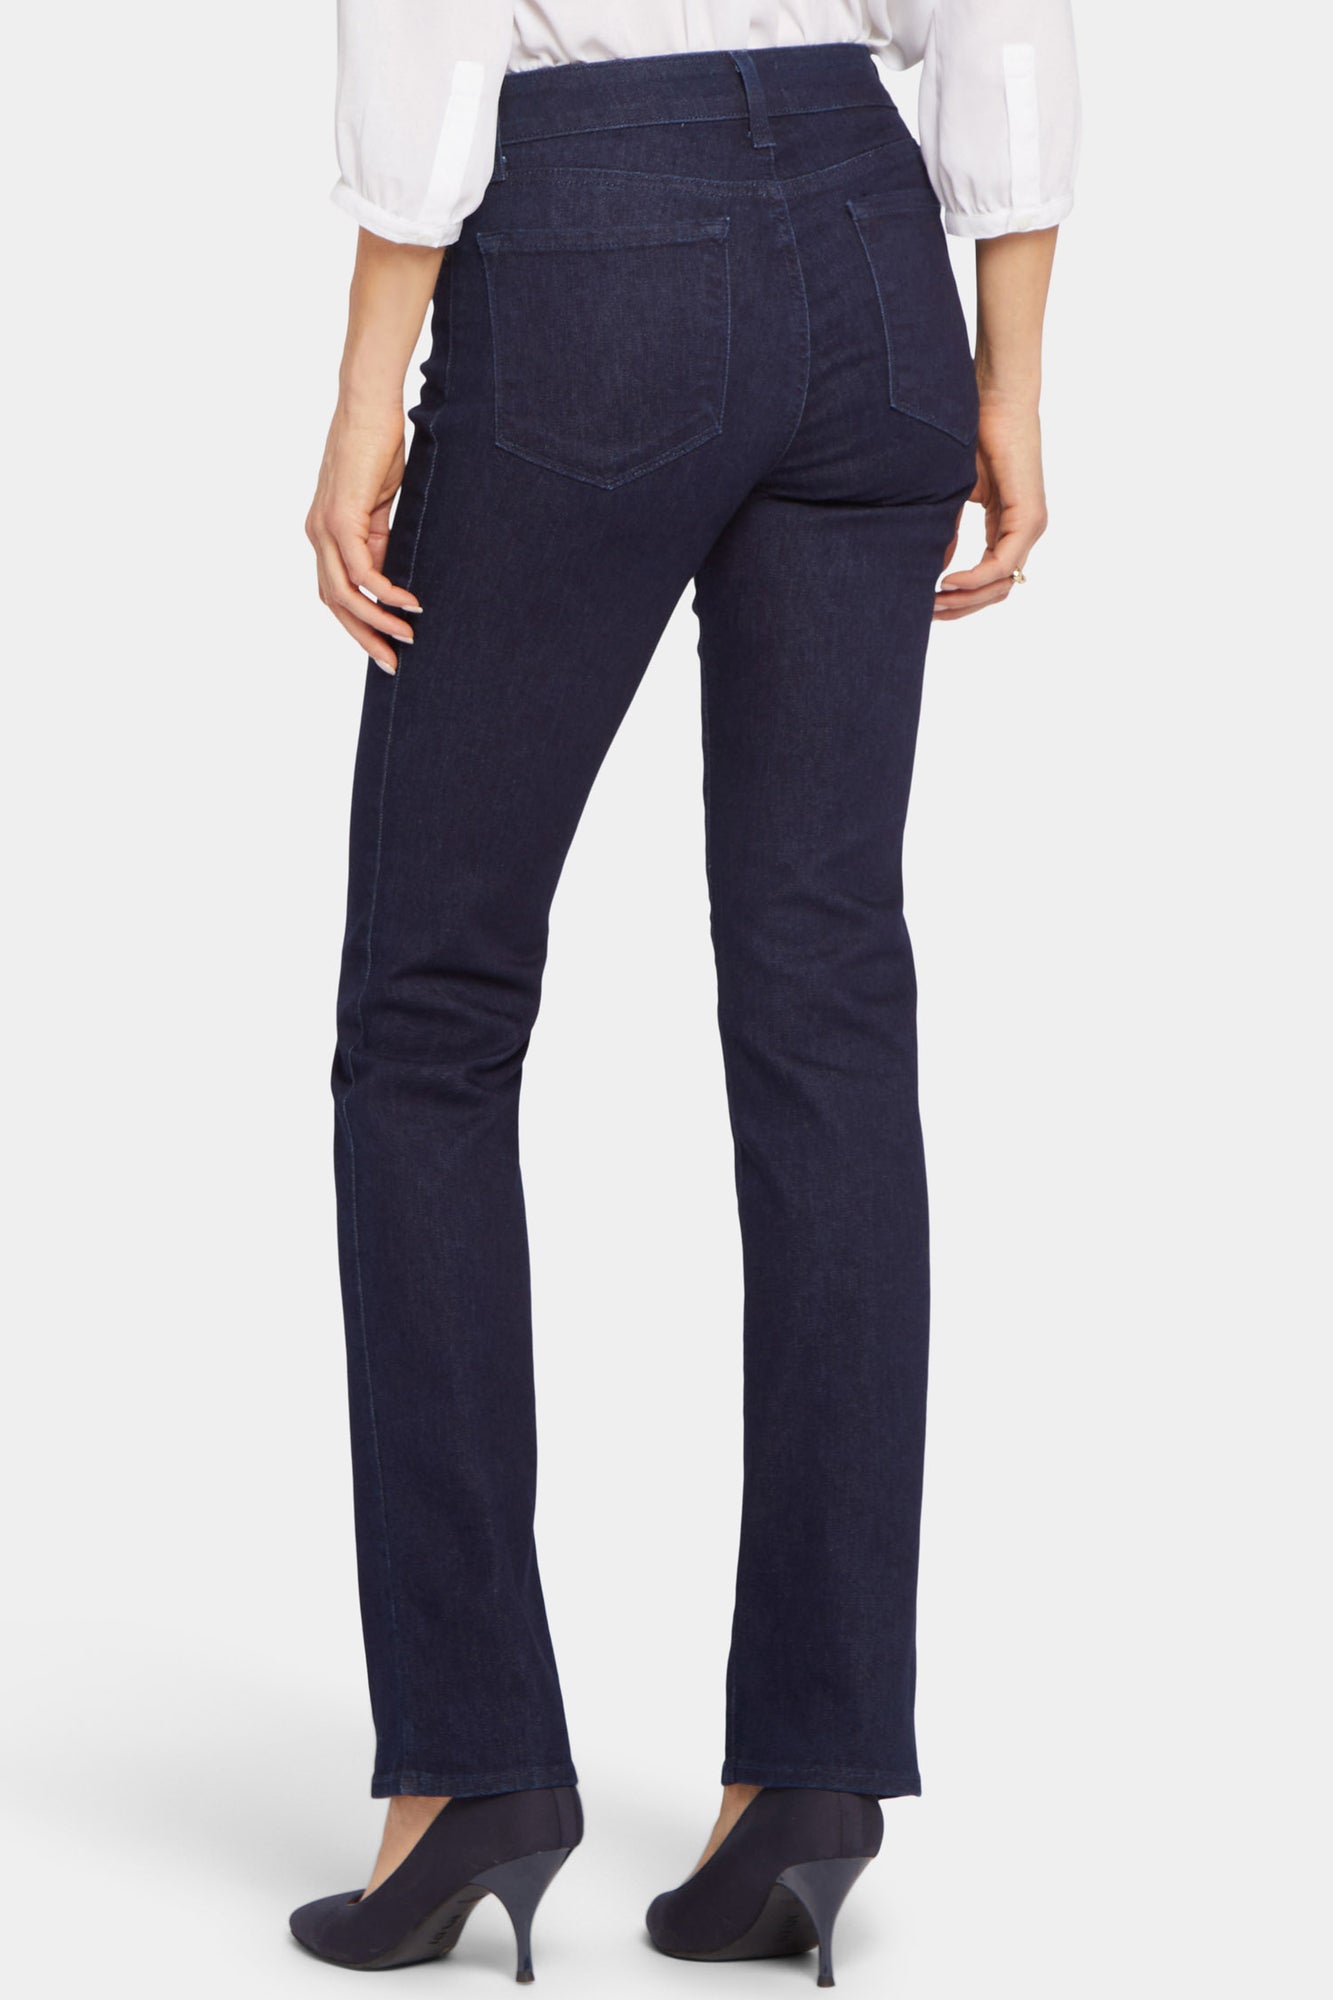 NYDJ Marilyn Straight Jeans With Short Inseam - Rinse